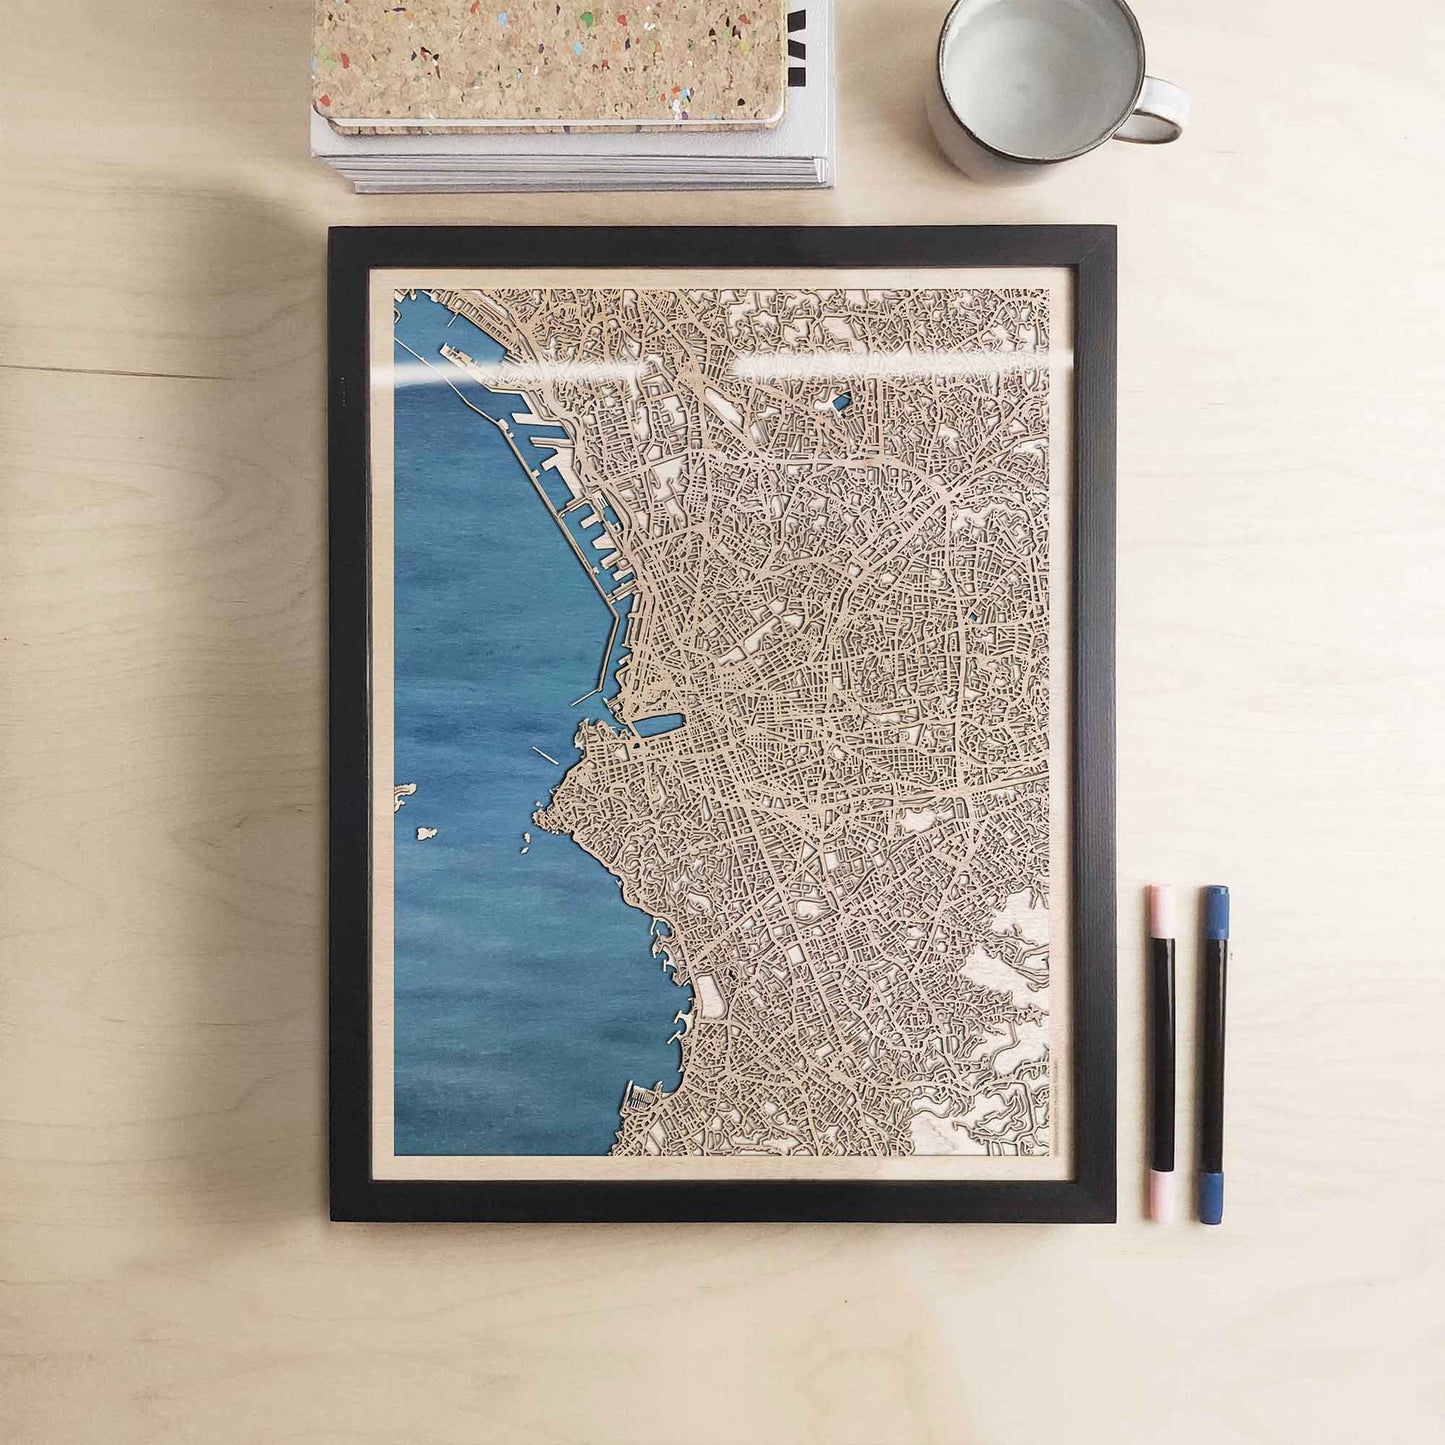 Marseille Wooden Map by CityWood - Custom Wood Map Art - Unique Laser Cut Engraved - Anniversary Gift